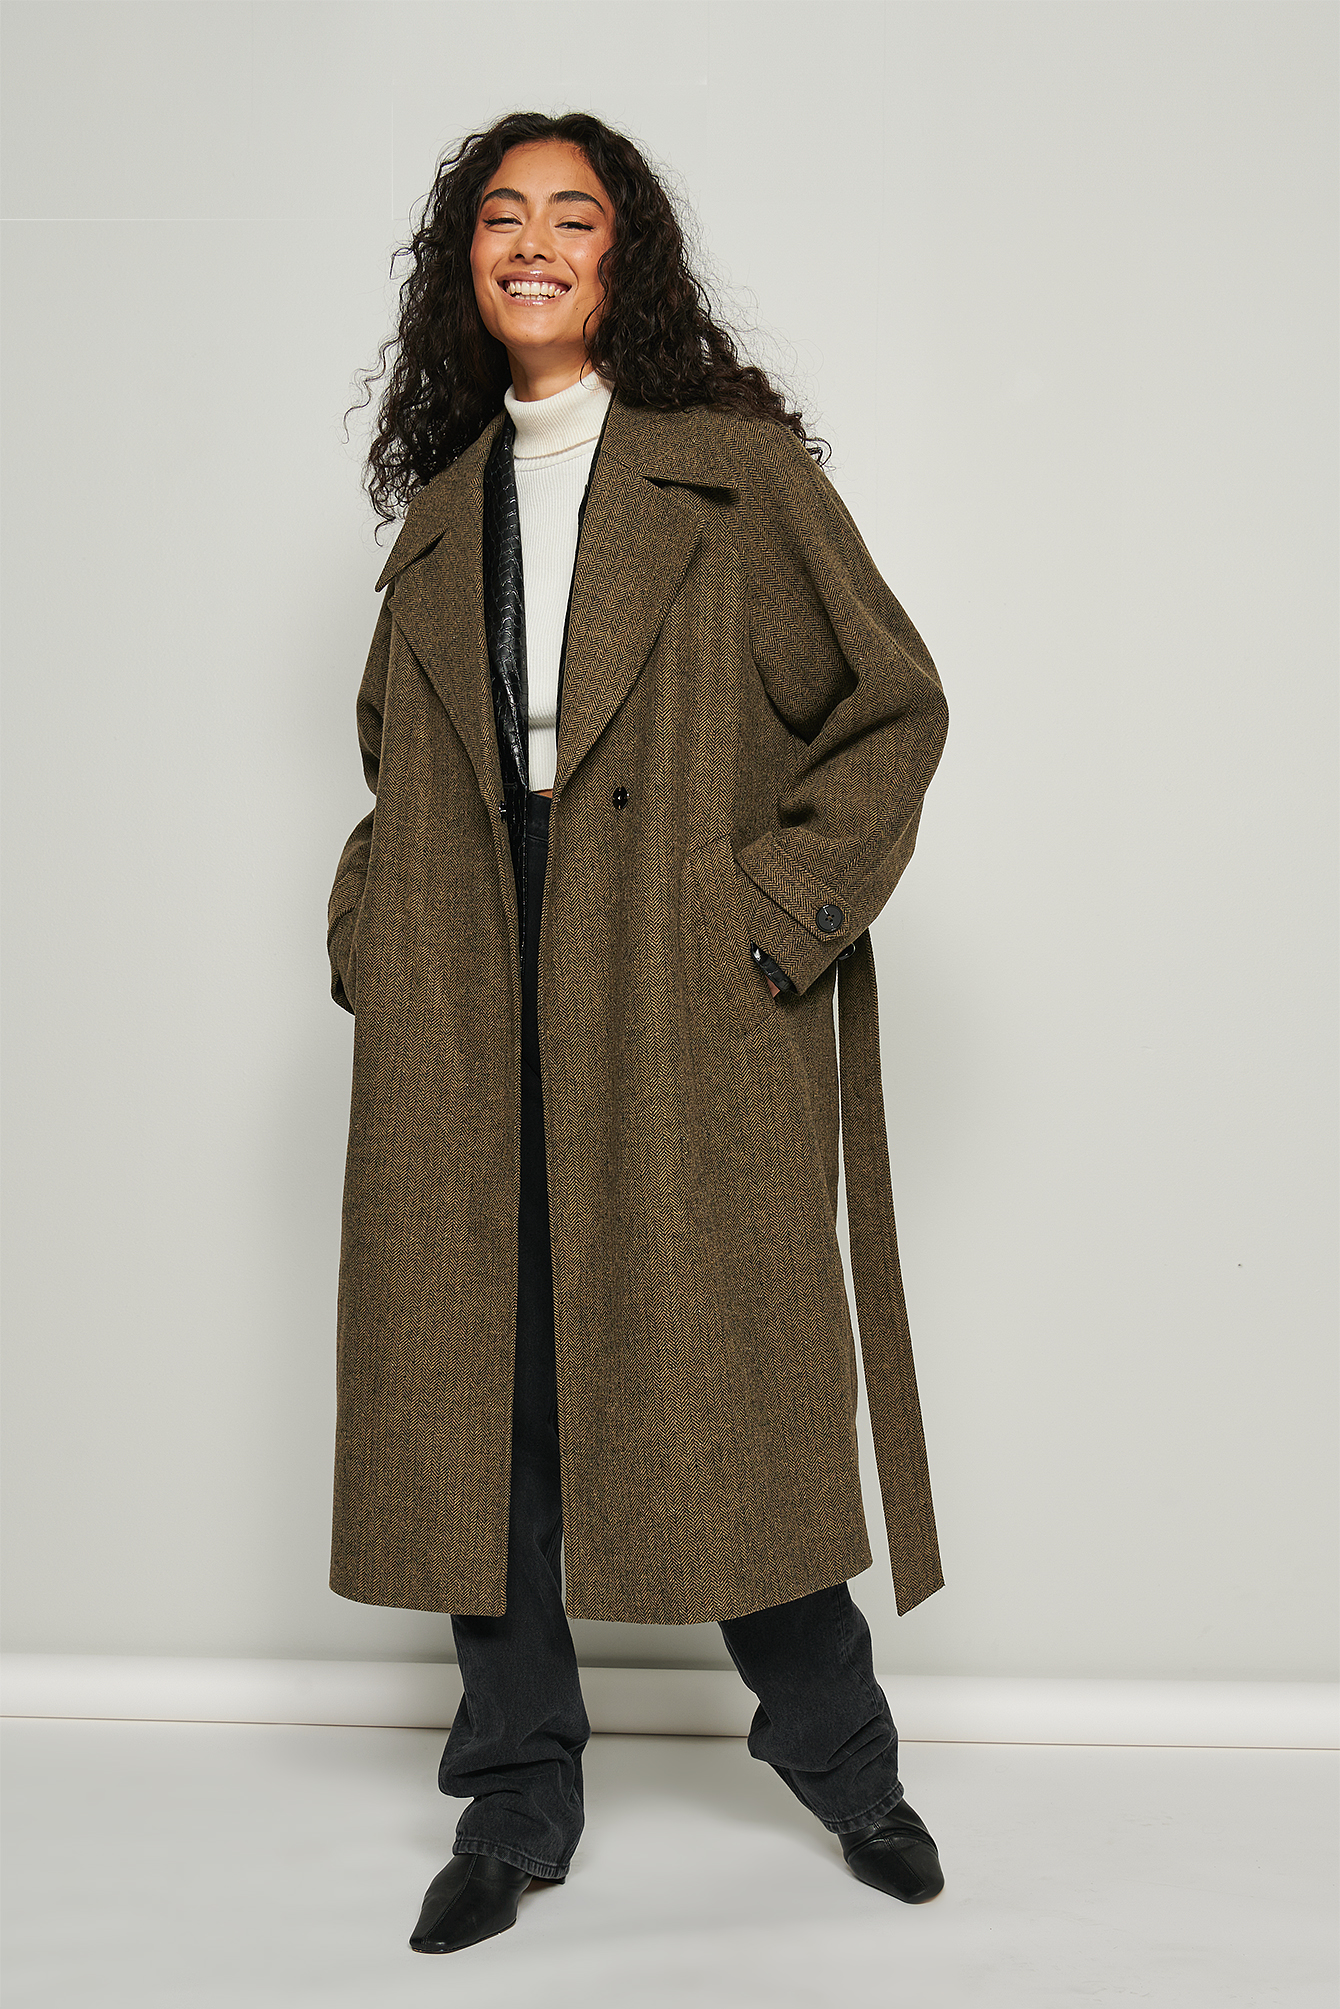 Herringbone Oversized Belted Coat Outfit.